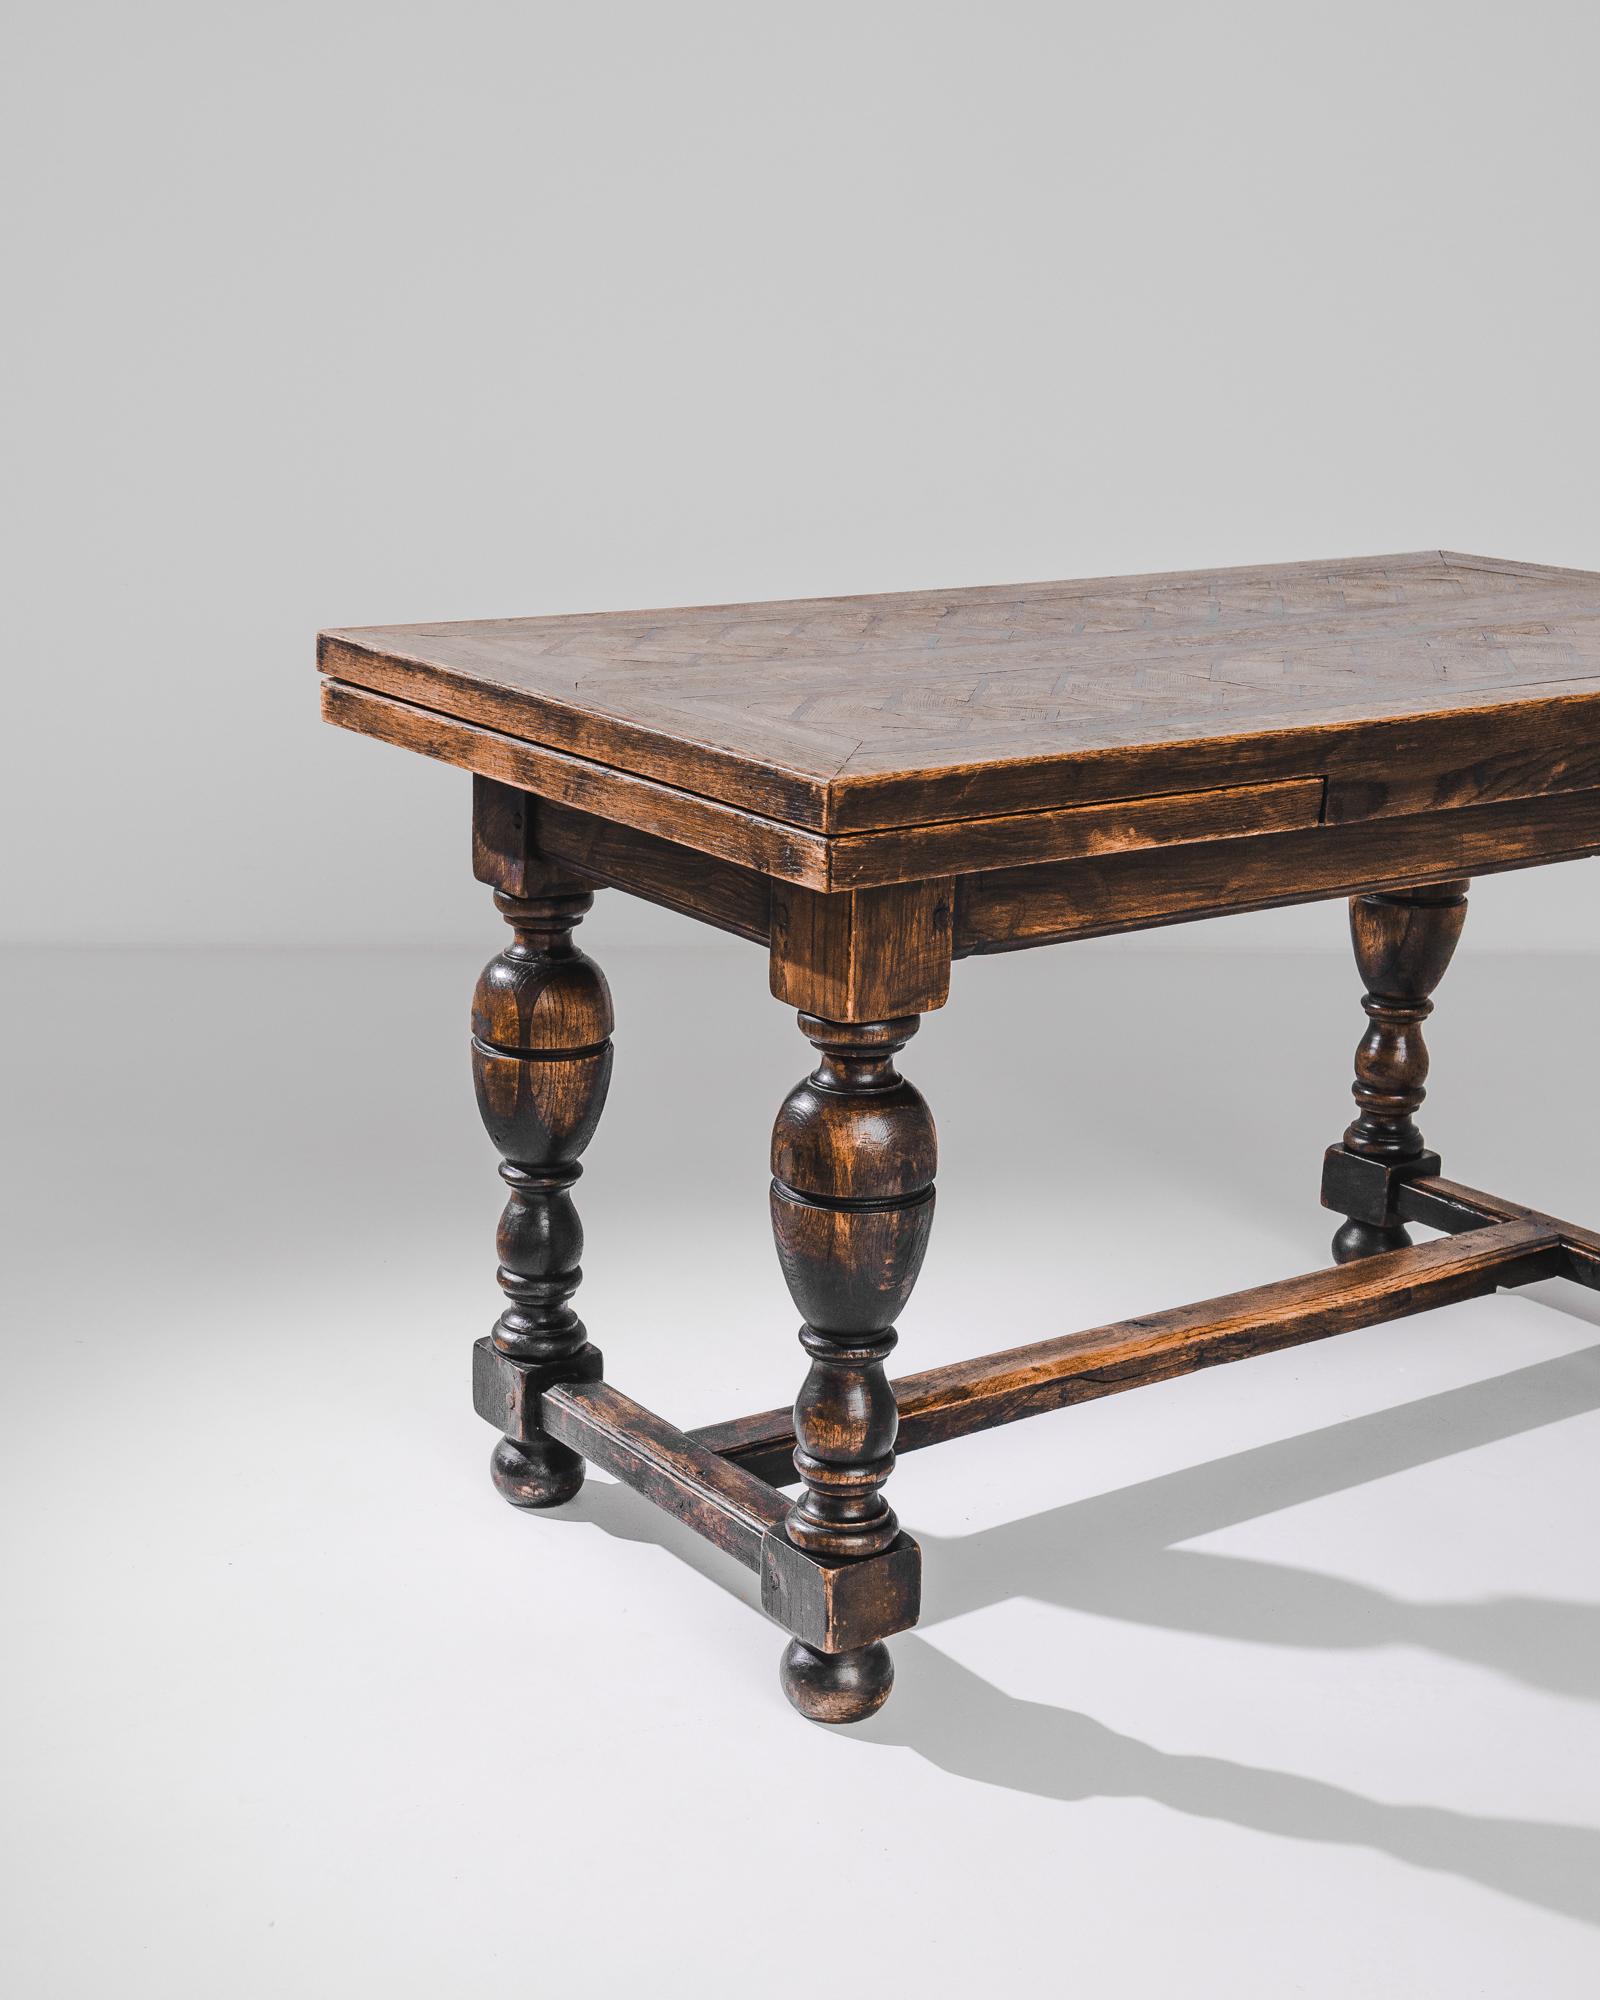 Belgian Antique Wooden Table With Folding Tabletop